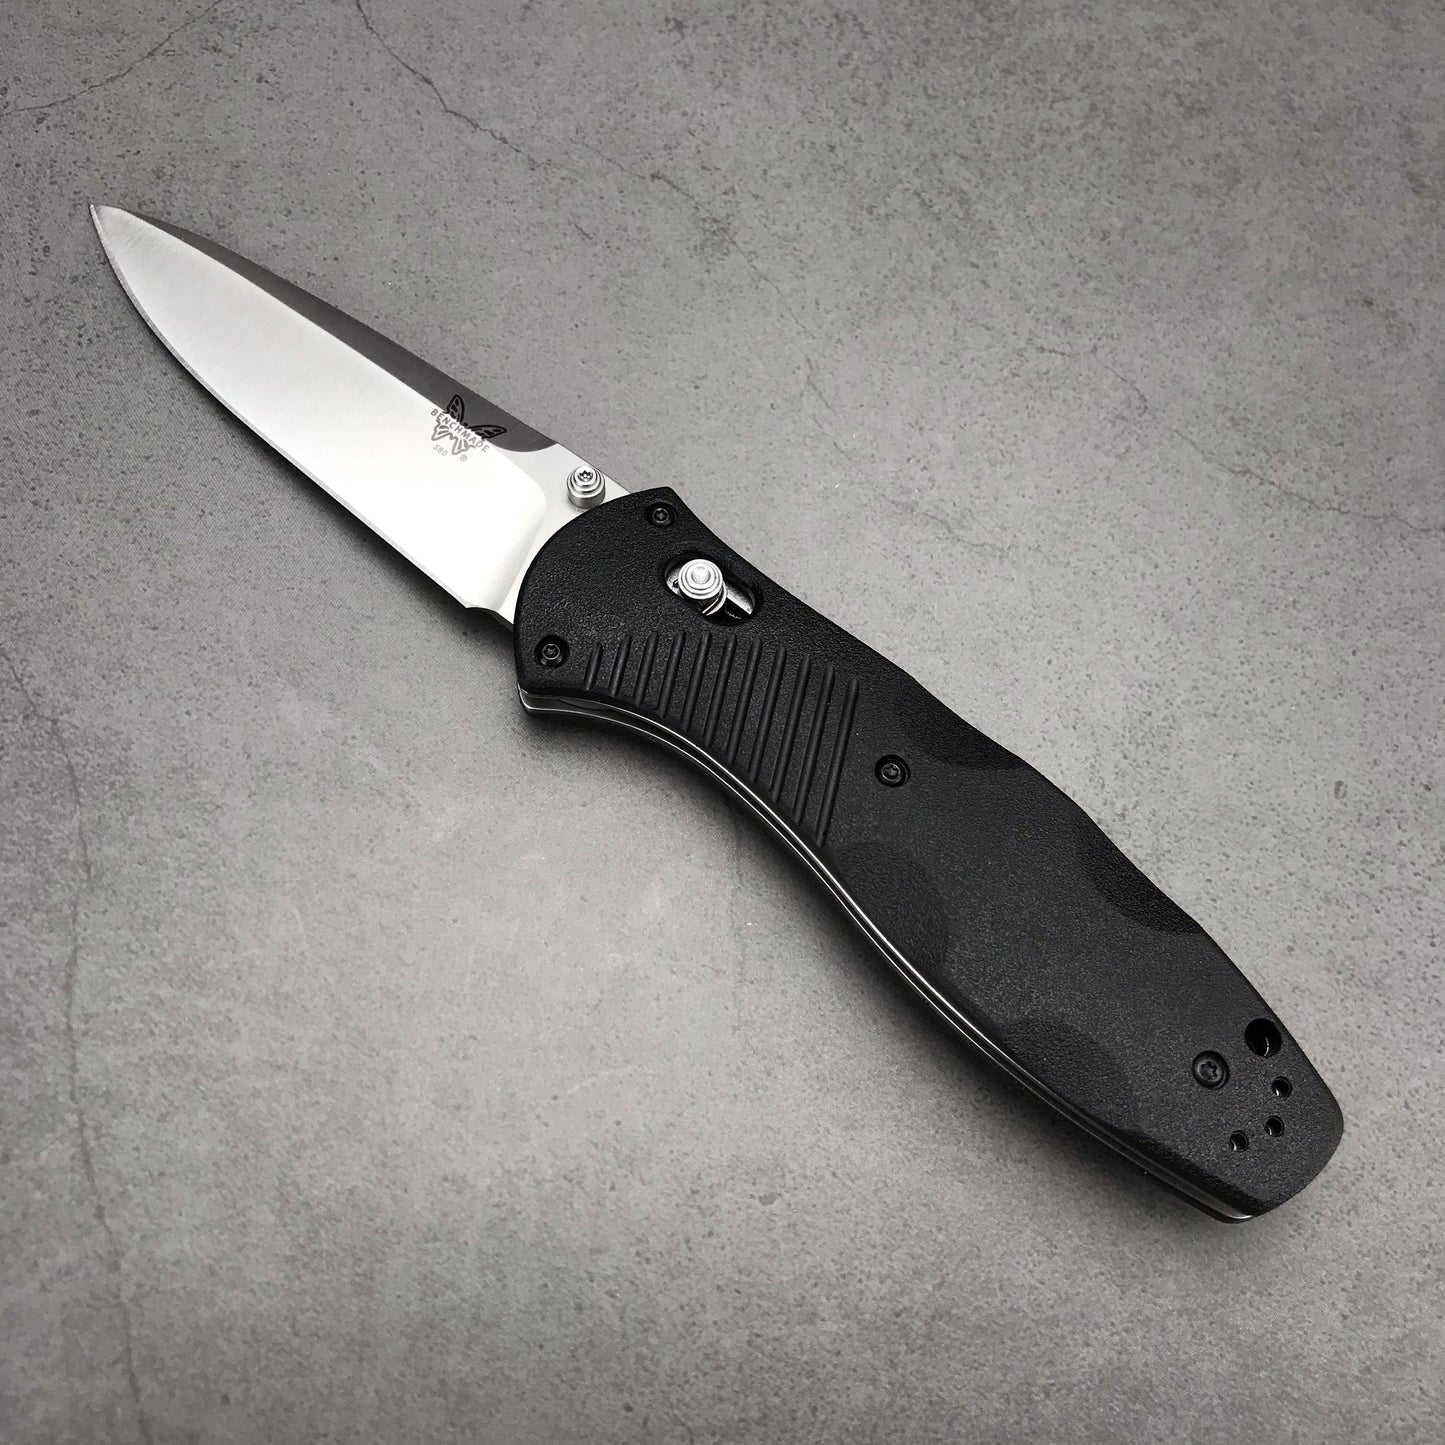 Benchmade Folding Knife Tactical Benchmade 580 Bugout AXIS Folding Knife 3.24"  S30V Satin Plain Blade Outdoor Hunting Camping Knife